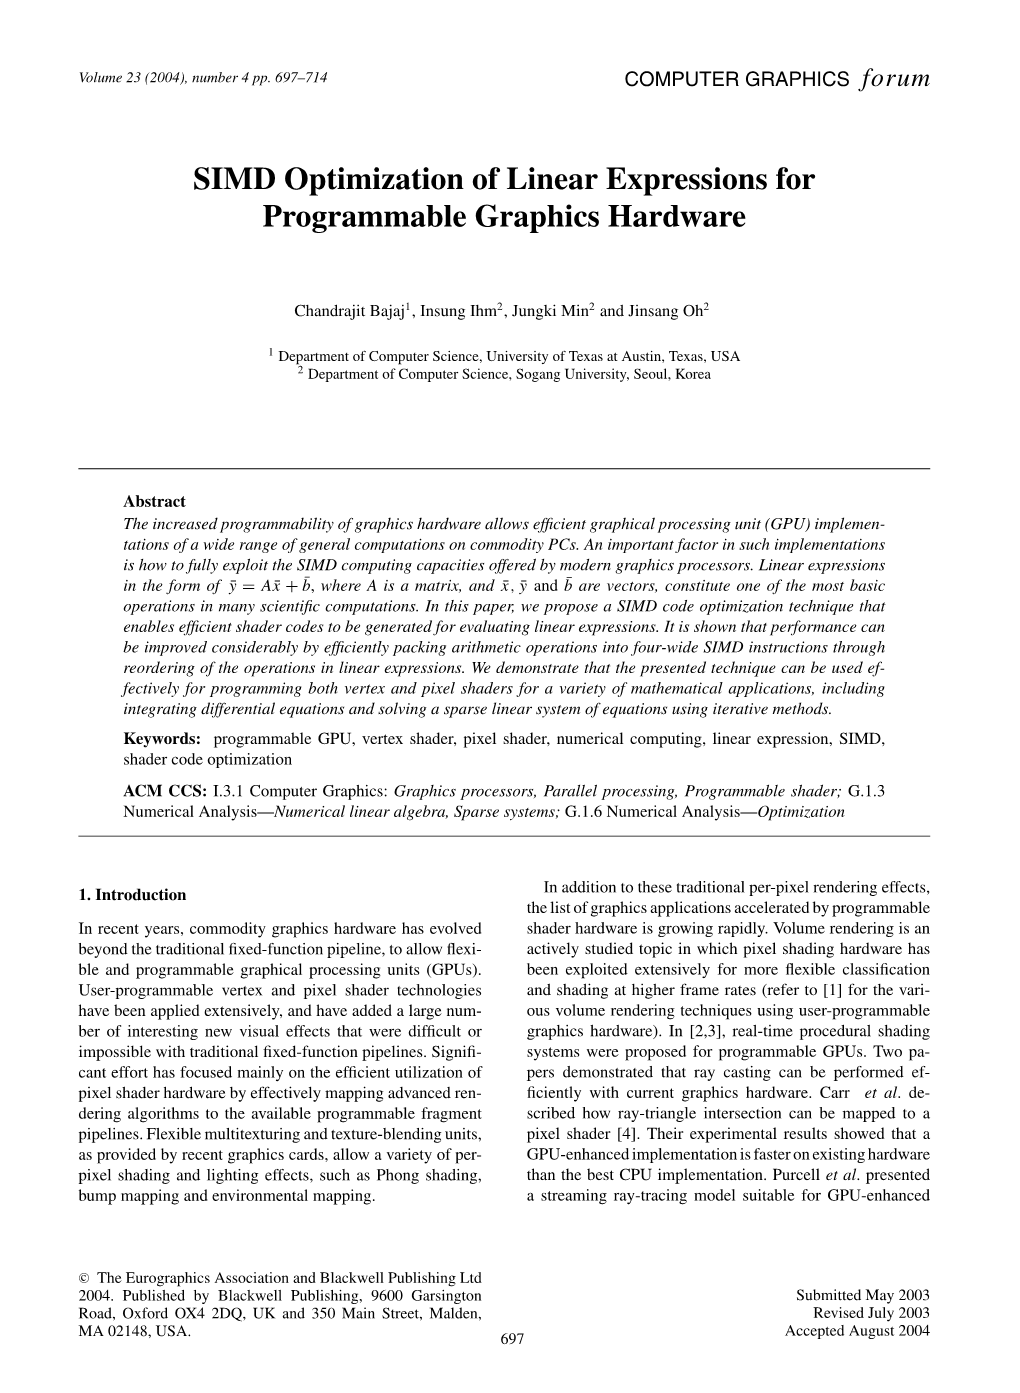 SIMD Optimization of Linear Expressions for Programmable Graphics Hardware